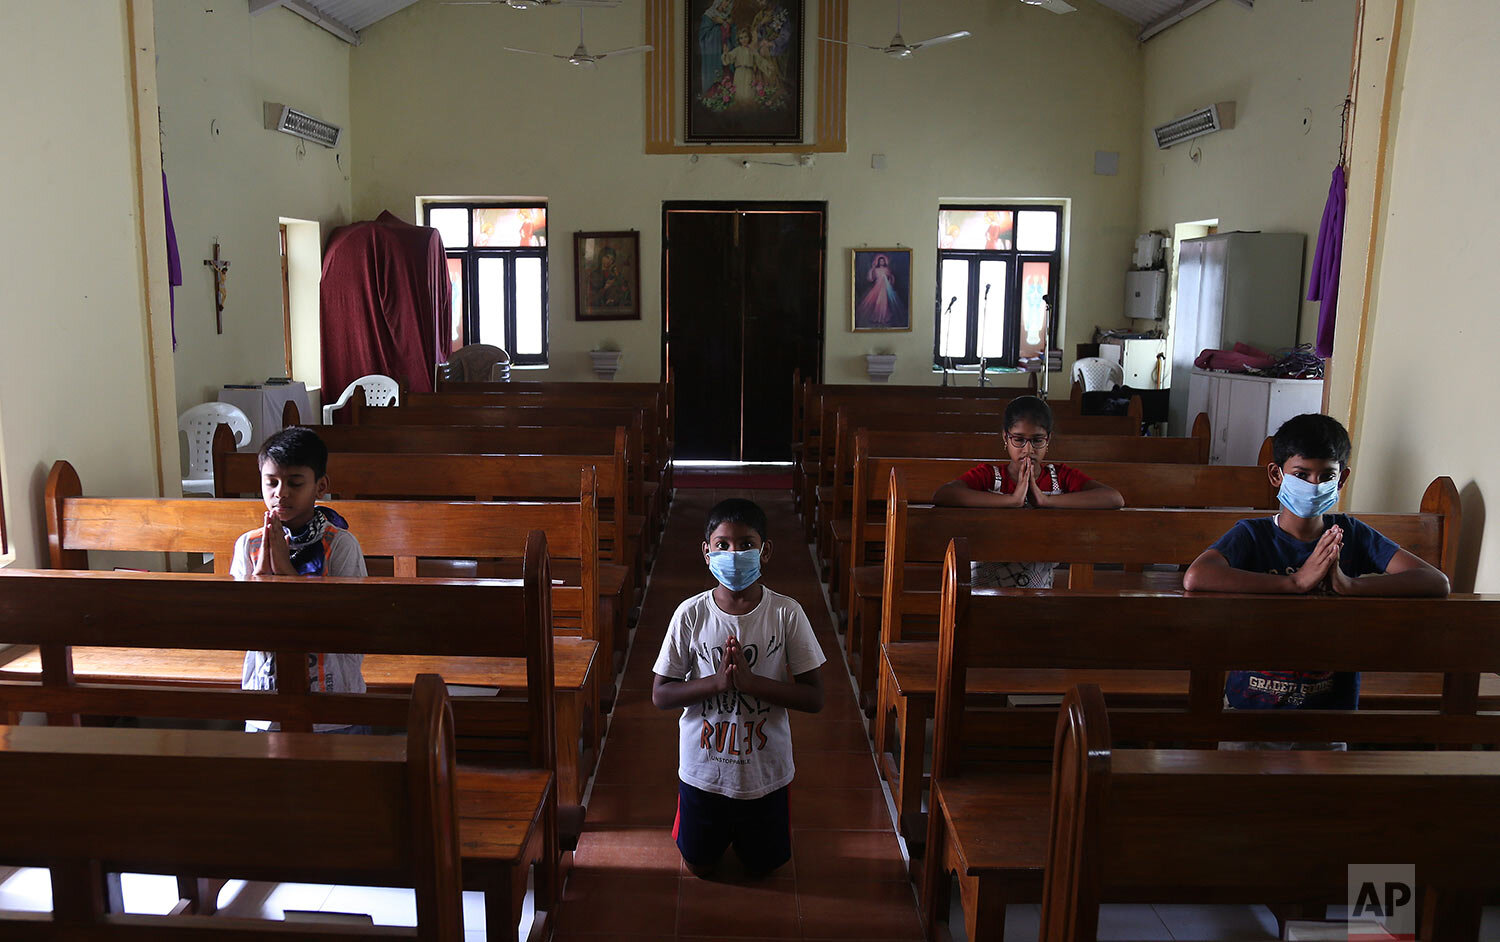  Catholic devotees offer prayers at Our Lady of Lourdes Church on Good Friday, during a lockdown to control the spread of the new coronavirus in Hyderabad, India, Friday, April 10, 2020.  (AP Photo/Mahesh Kumar A.) 